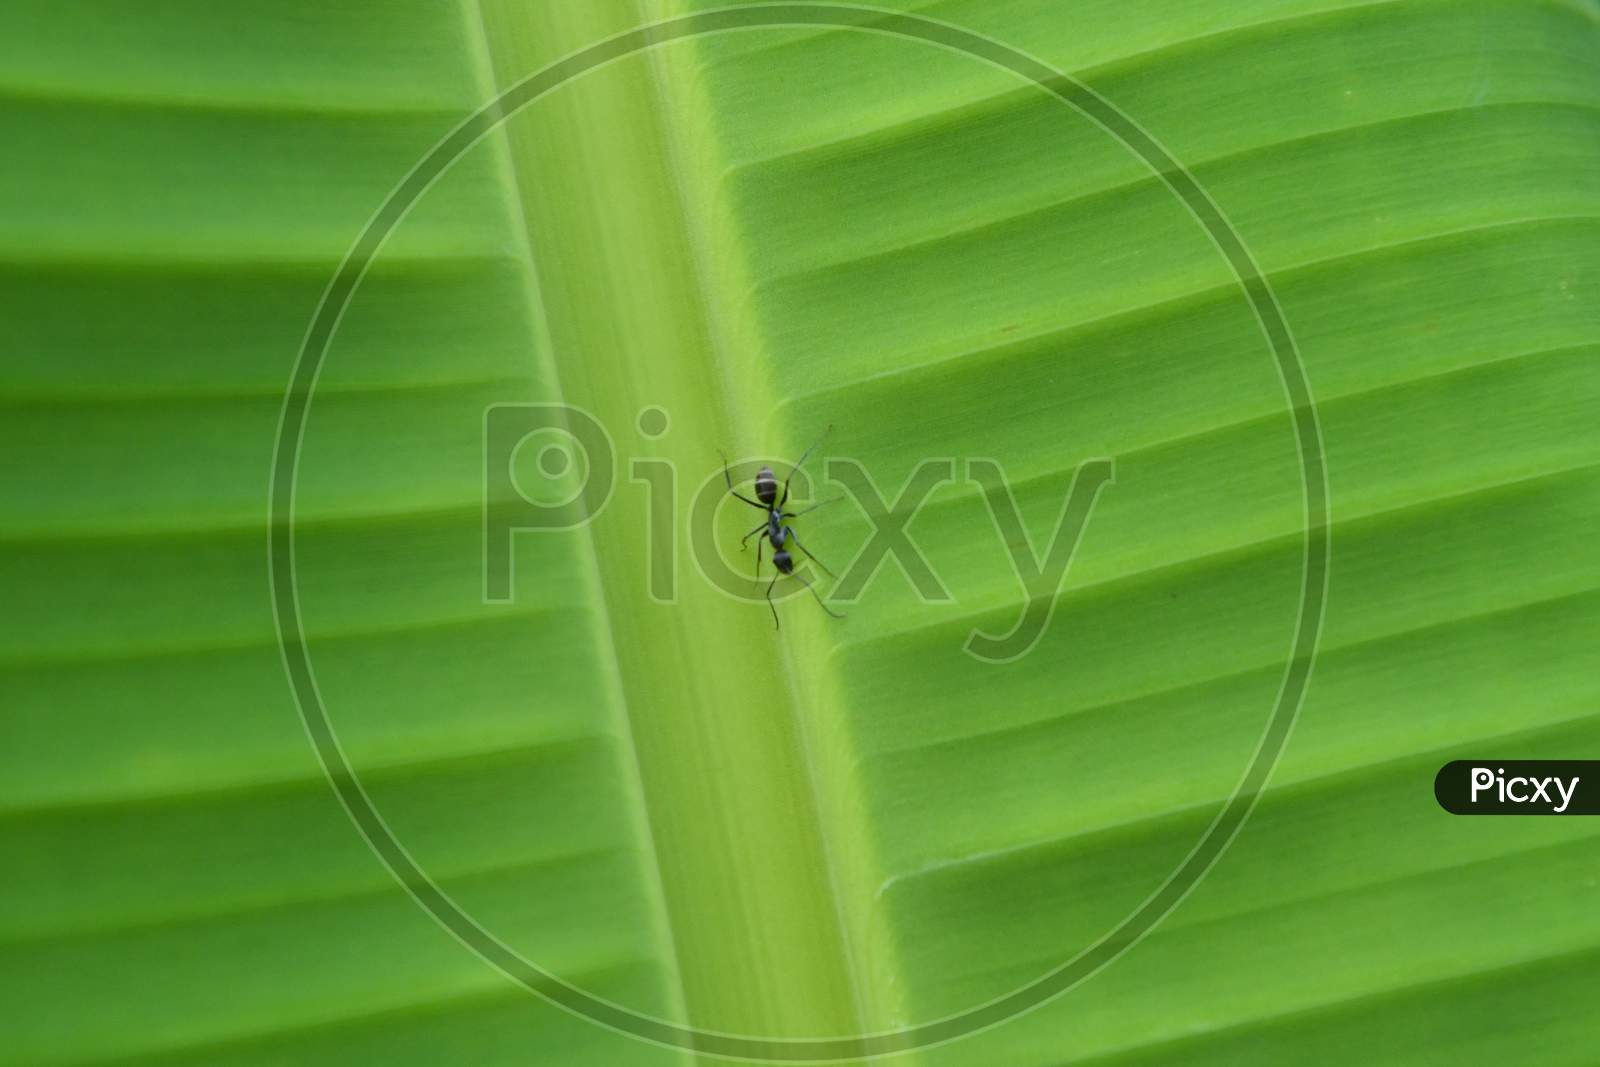 Ant on a plantain leaf.